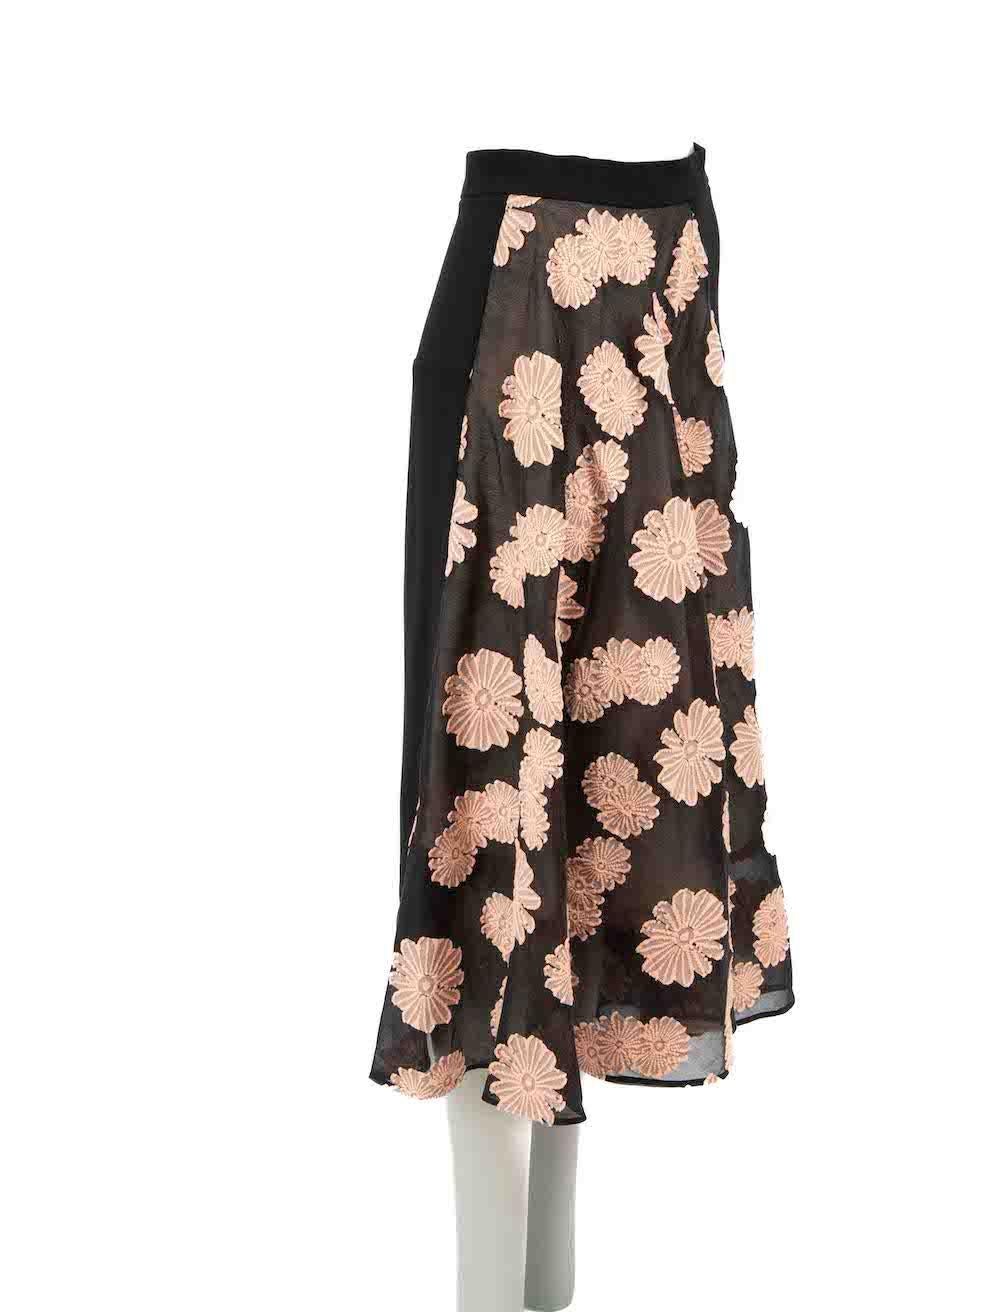 CONDITION is Good. Minor wear to skirt is evident. Light wear to the left side with a small mark and there are pulls to the weave at the rear on this used Roland Mouret designer resale item.

Details
Black
Cotton
Flared skirt
Midi length
Contrast